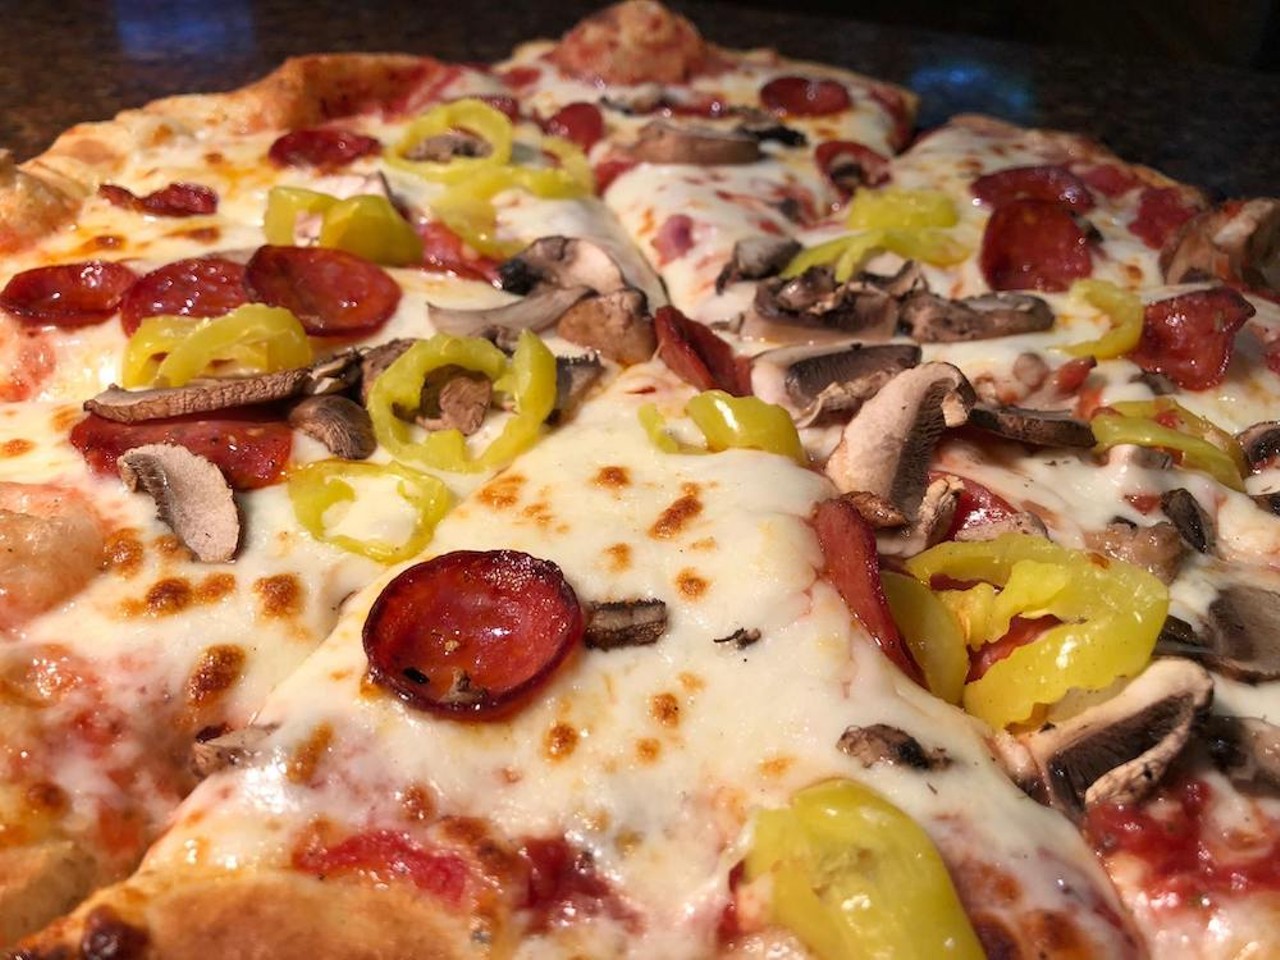 Delicio Coal Fired Pizza/Hoppin’ Vines
8150 Montgomery Rd., Madeira
Delicio Trio: This 12-inch pie features fire-roasted tomato sauce, pepperoni, mushrooms, banana peppers and house-blend cheese.